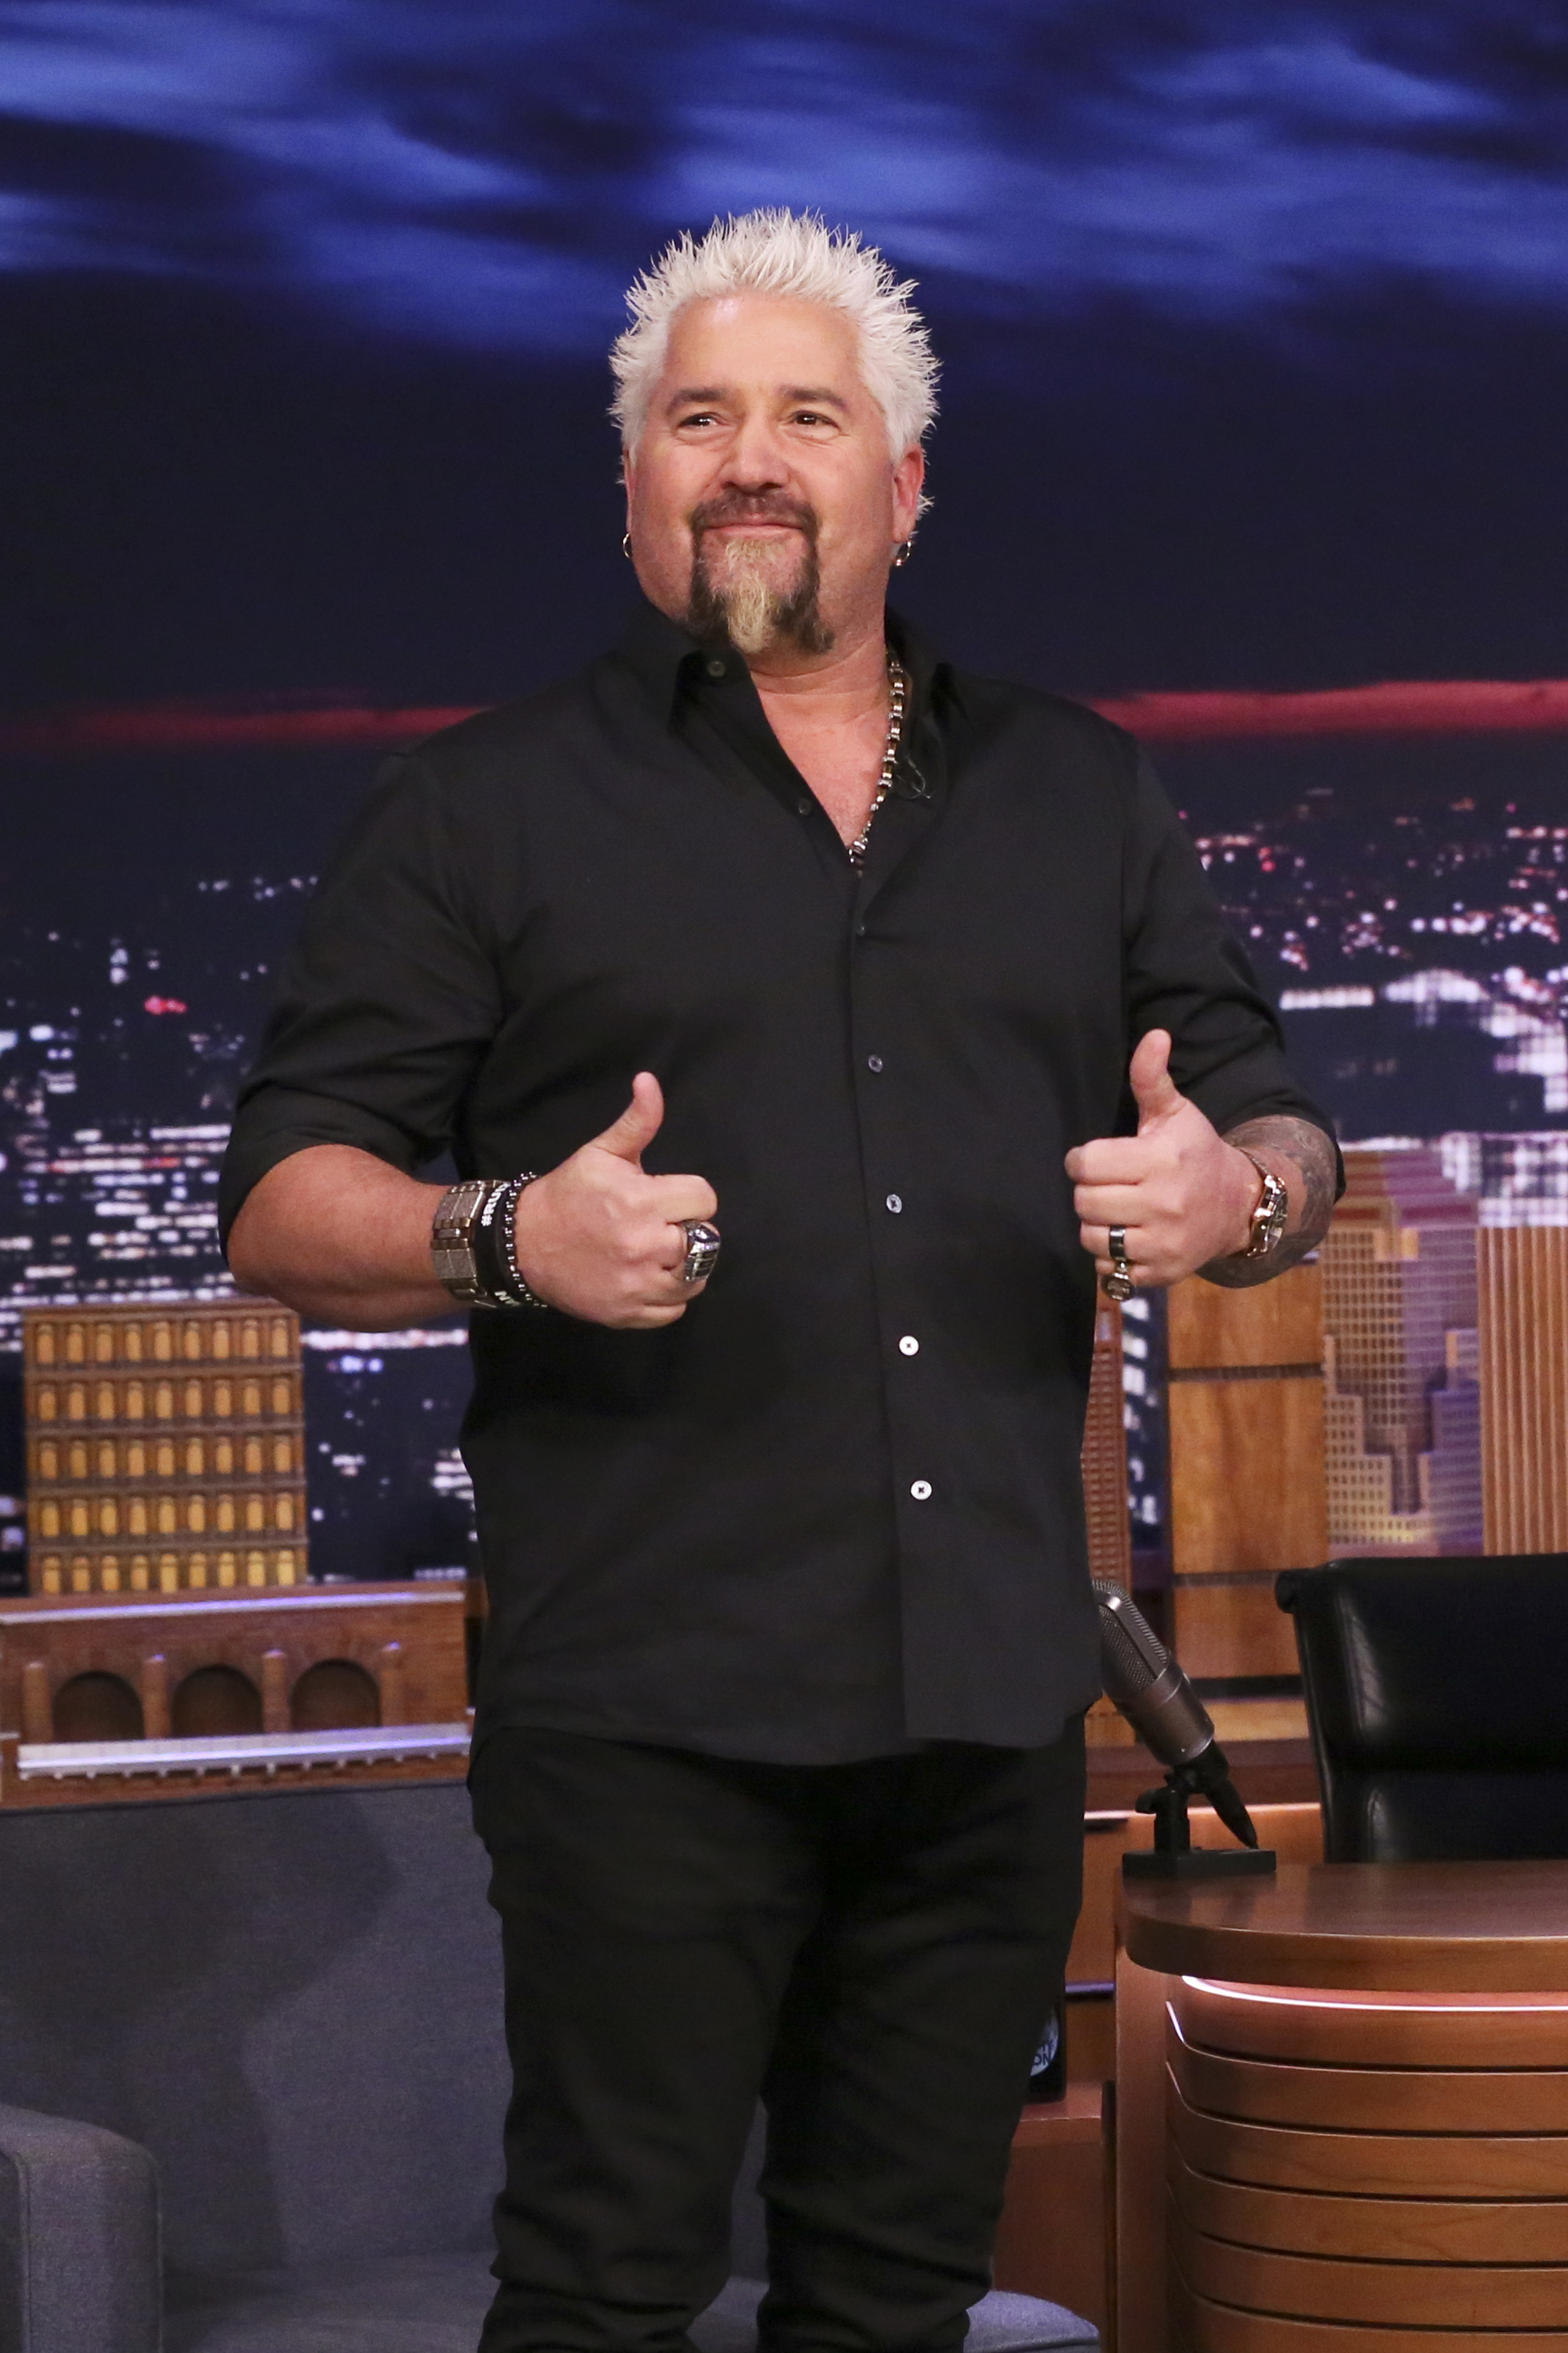 Guy Fieri recently opened up about the challenge of staying fit and healthy